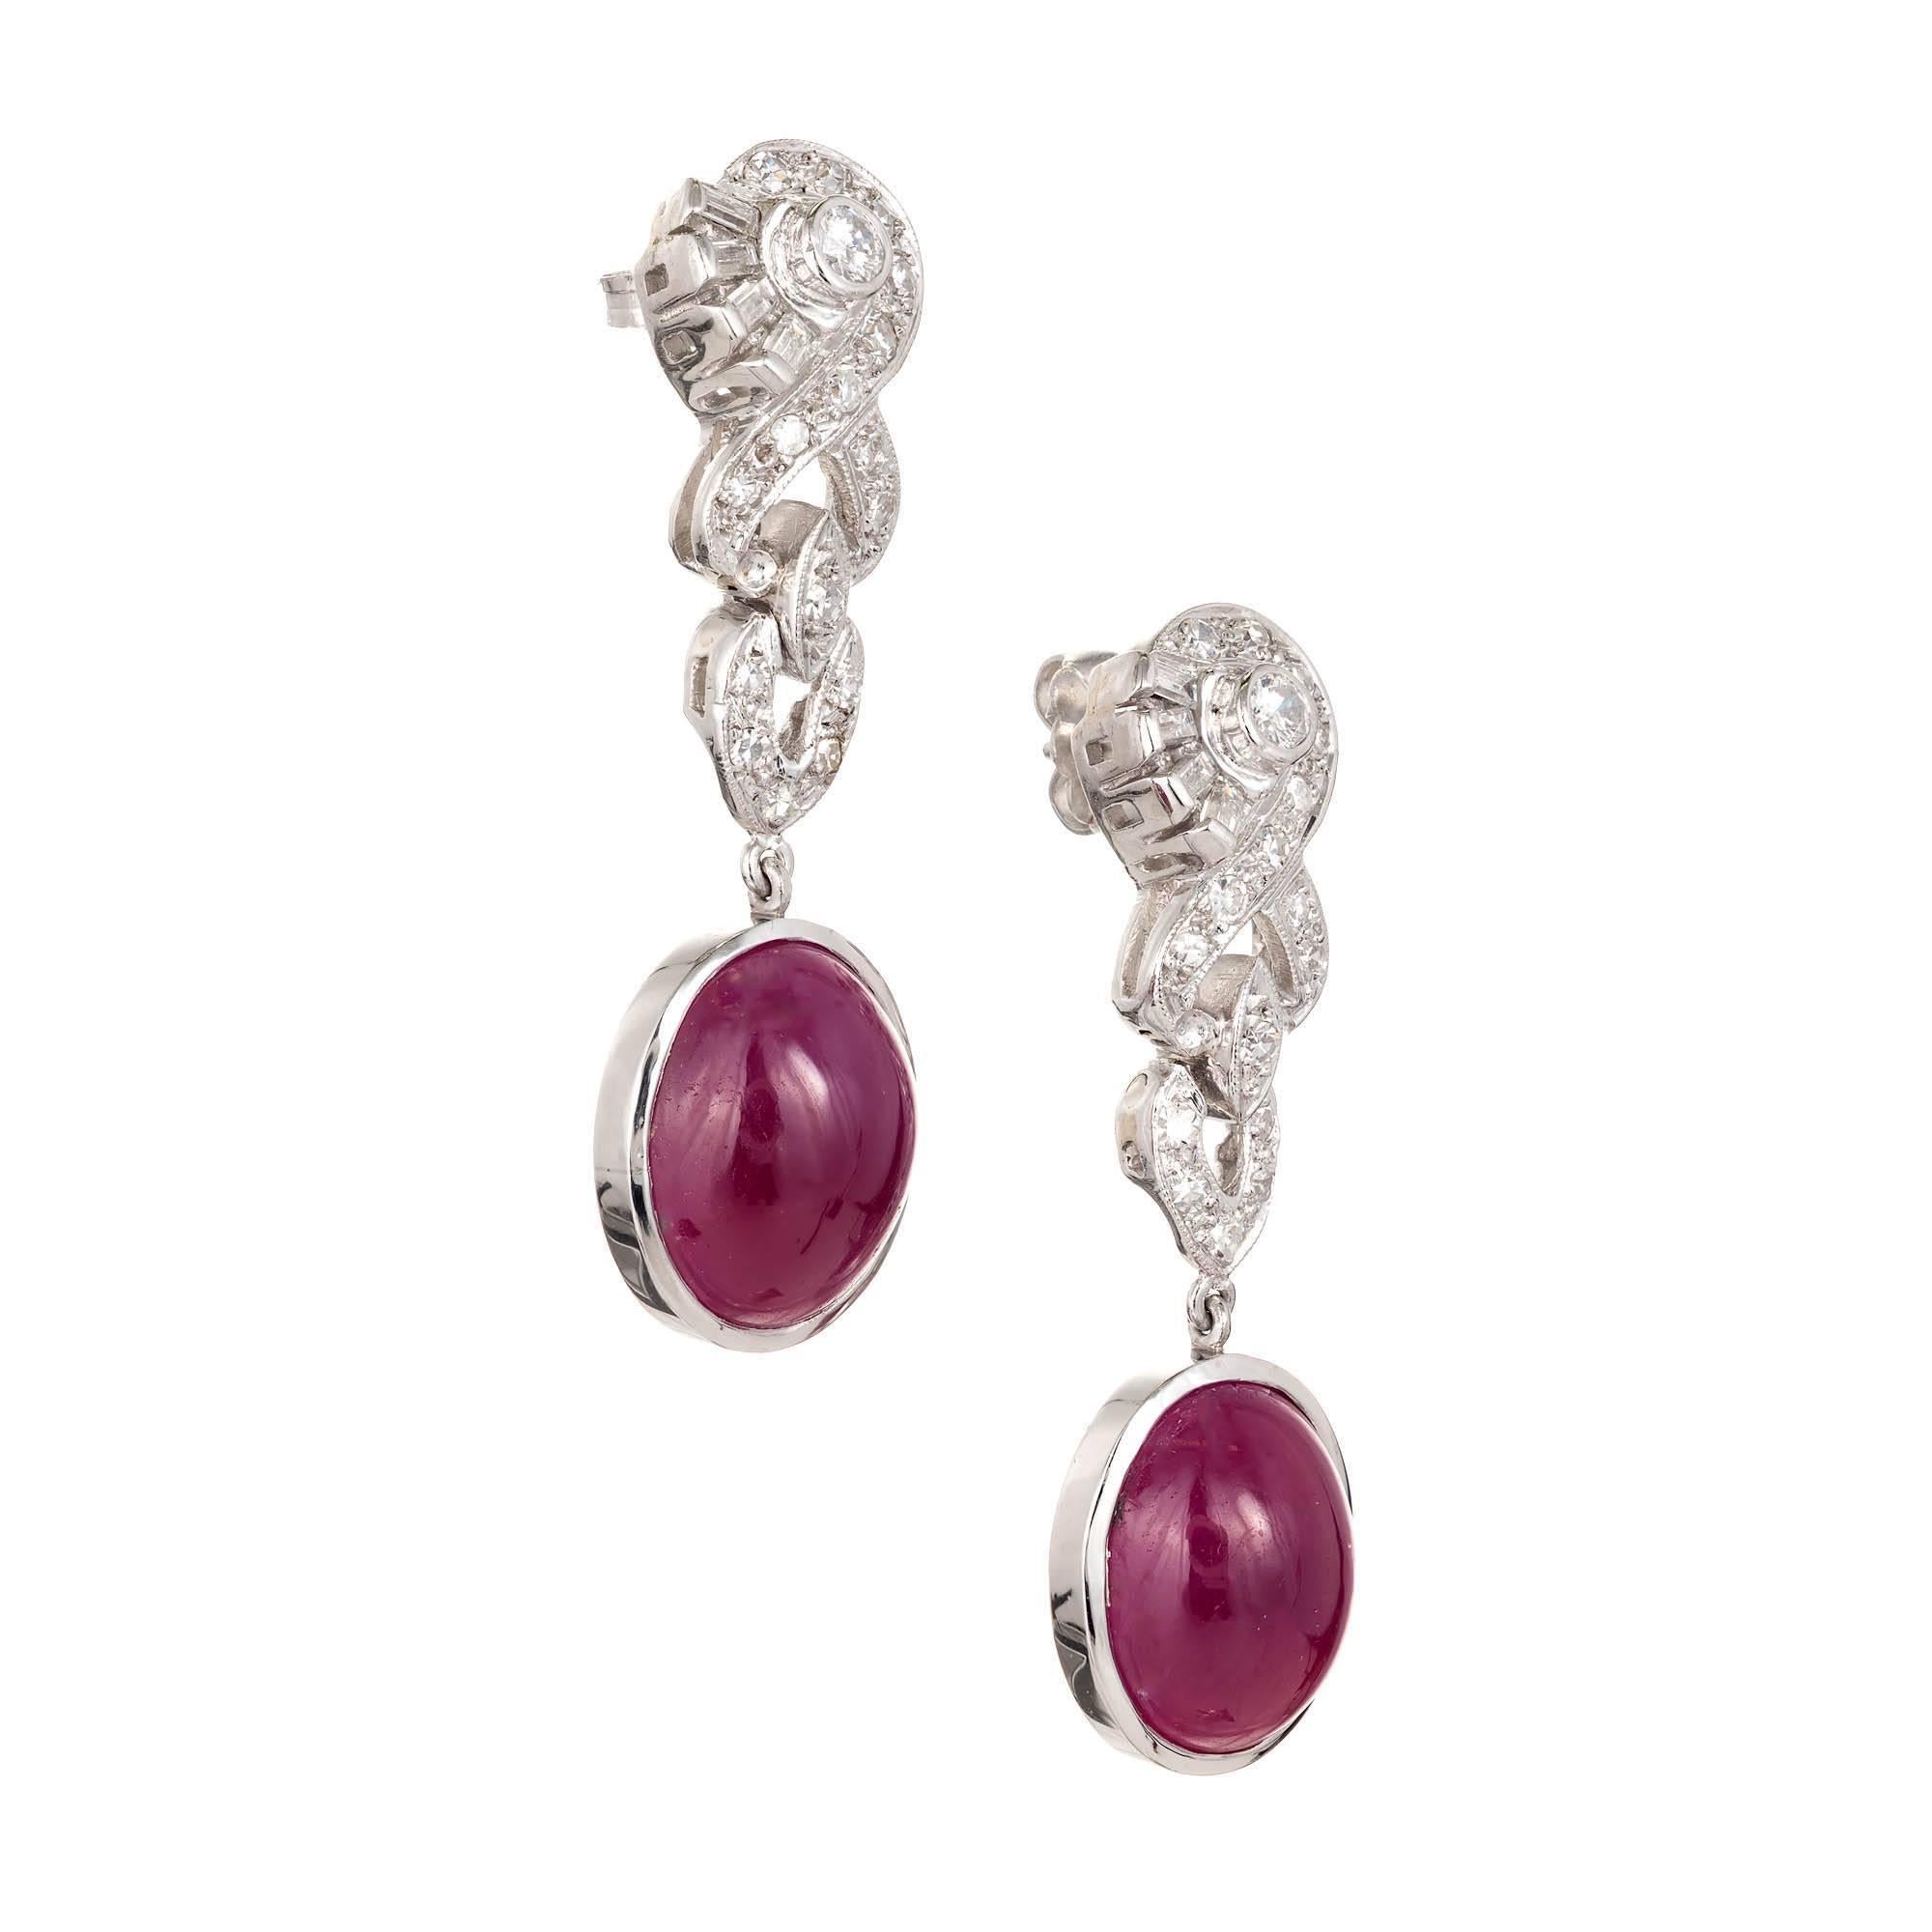 Oval Natural cabochon fine translucent red Ruby 14.32ct and diamond solid Platinum 1940s diamond dangle earrings.

2 natural no heat CMT Type 1, approx. total weight 14.32cts, 11.5 x 6.2mm, true red cabochon Rubies. GIA certificate#1152085780
2 full